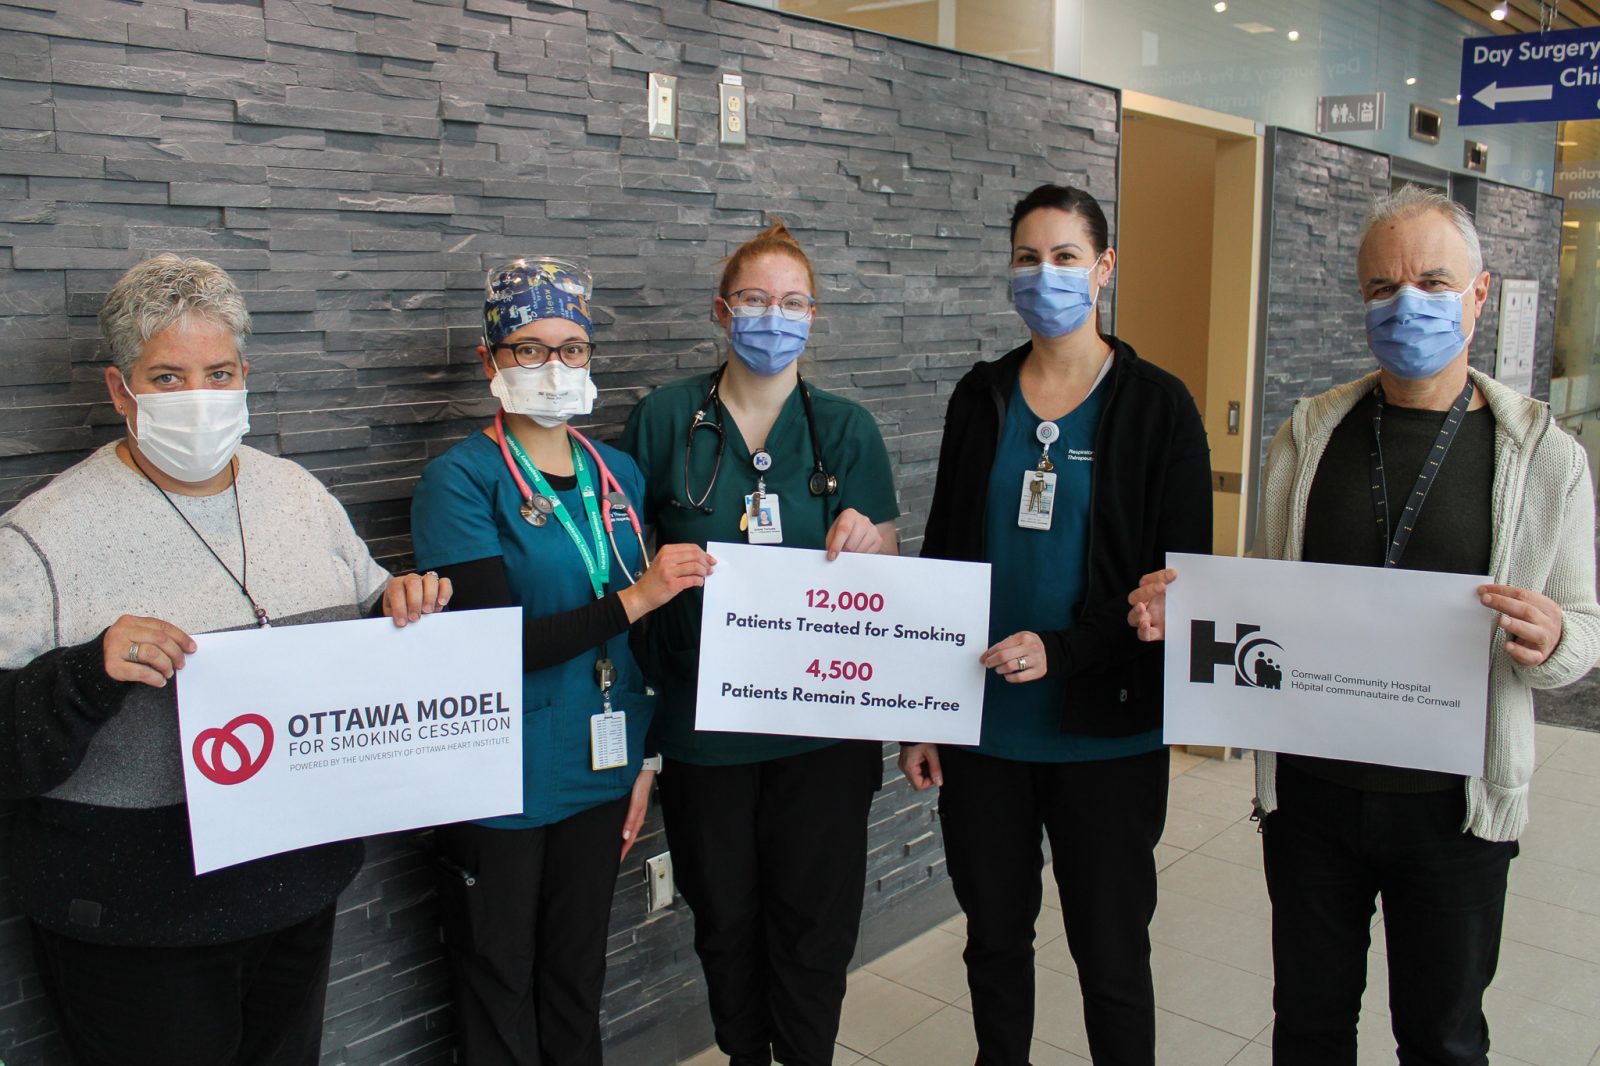 15-Year Hospital Partnership Helping Local Patients Quit Smoking